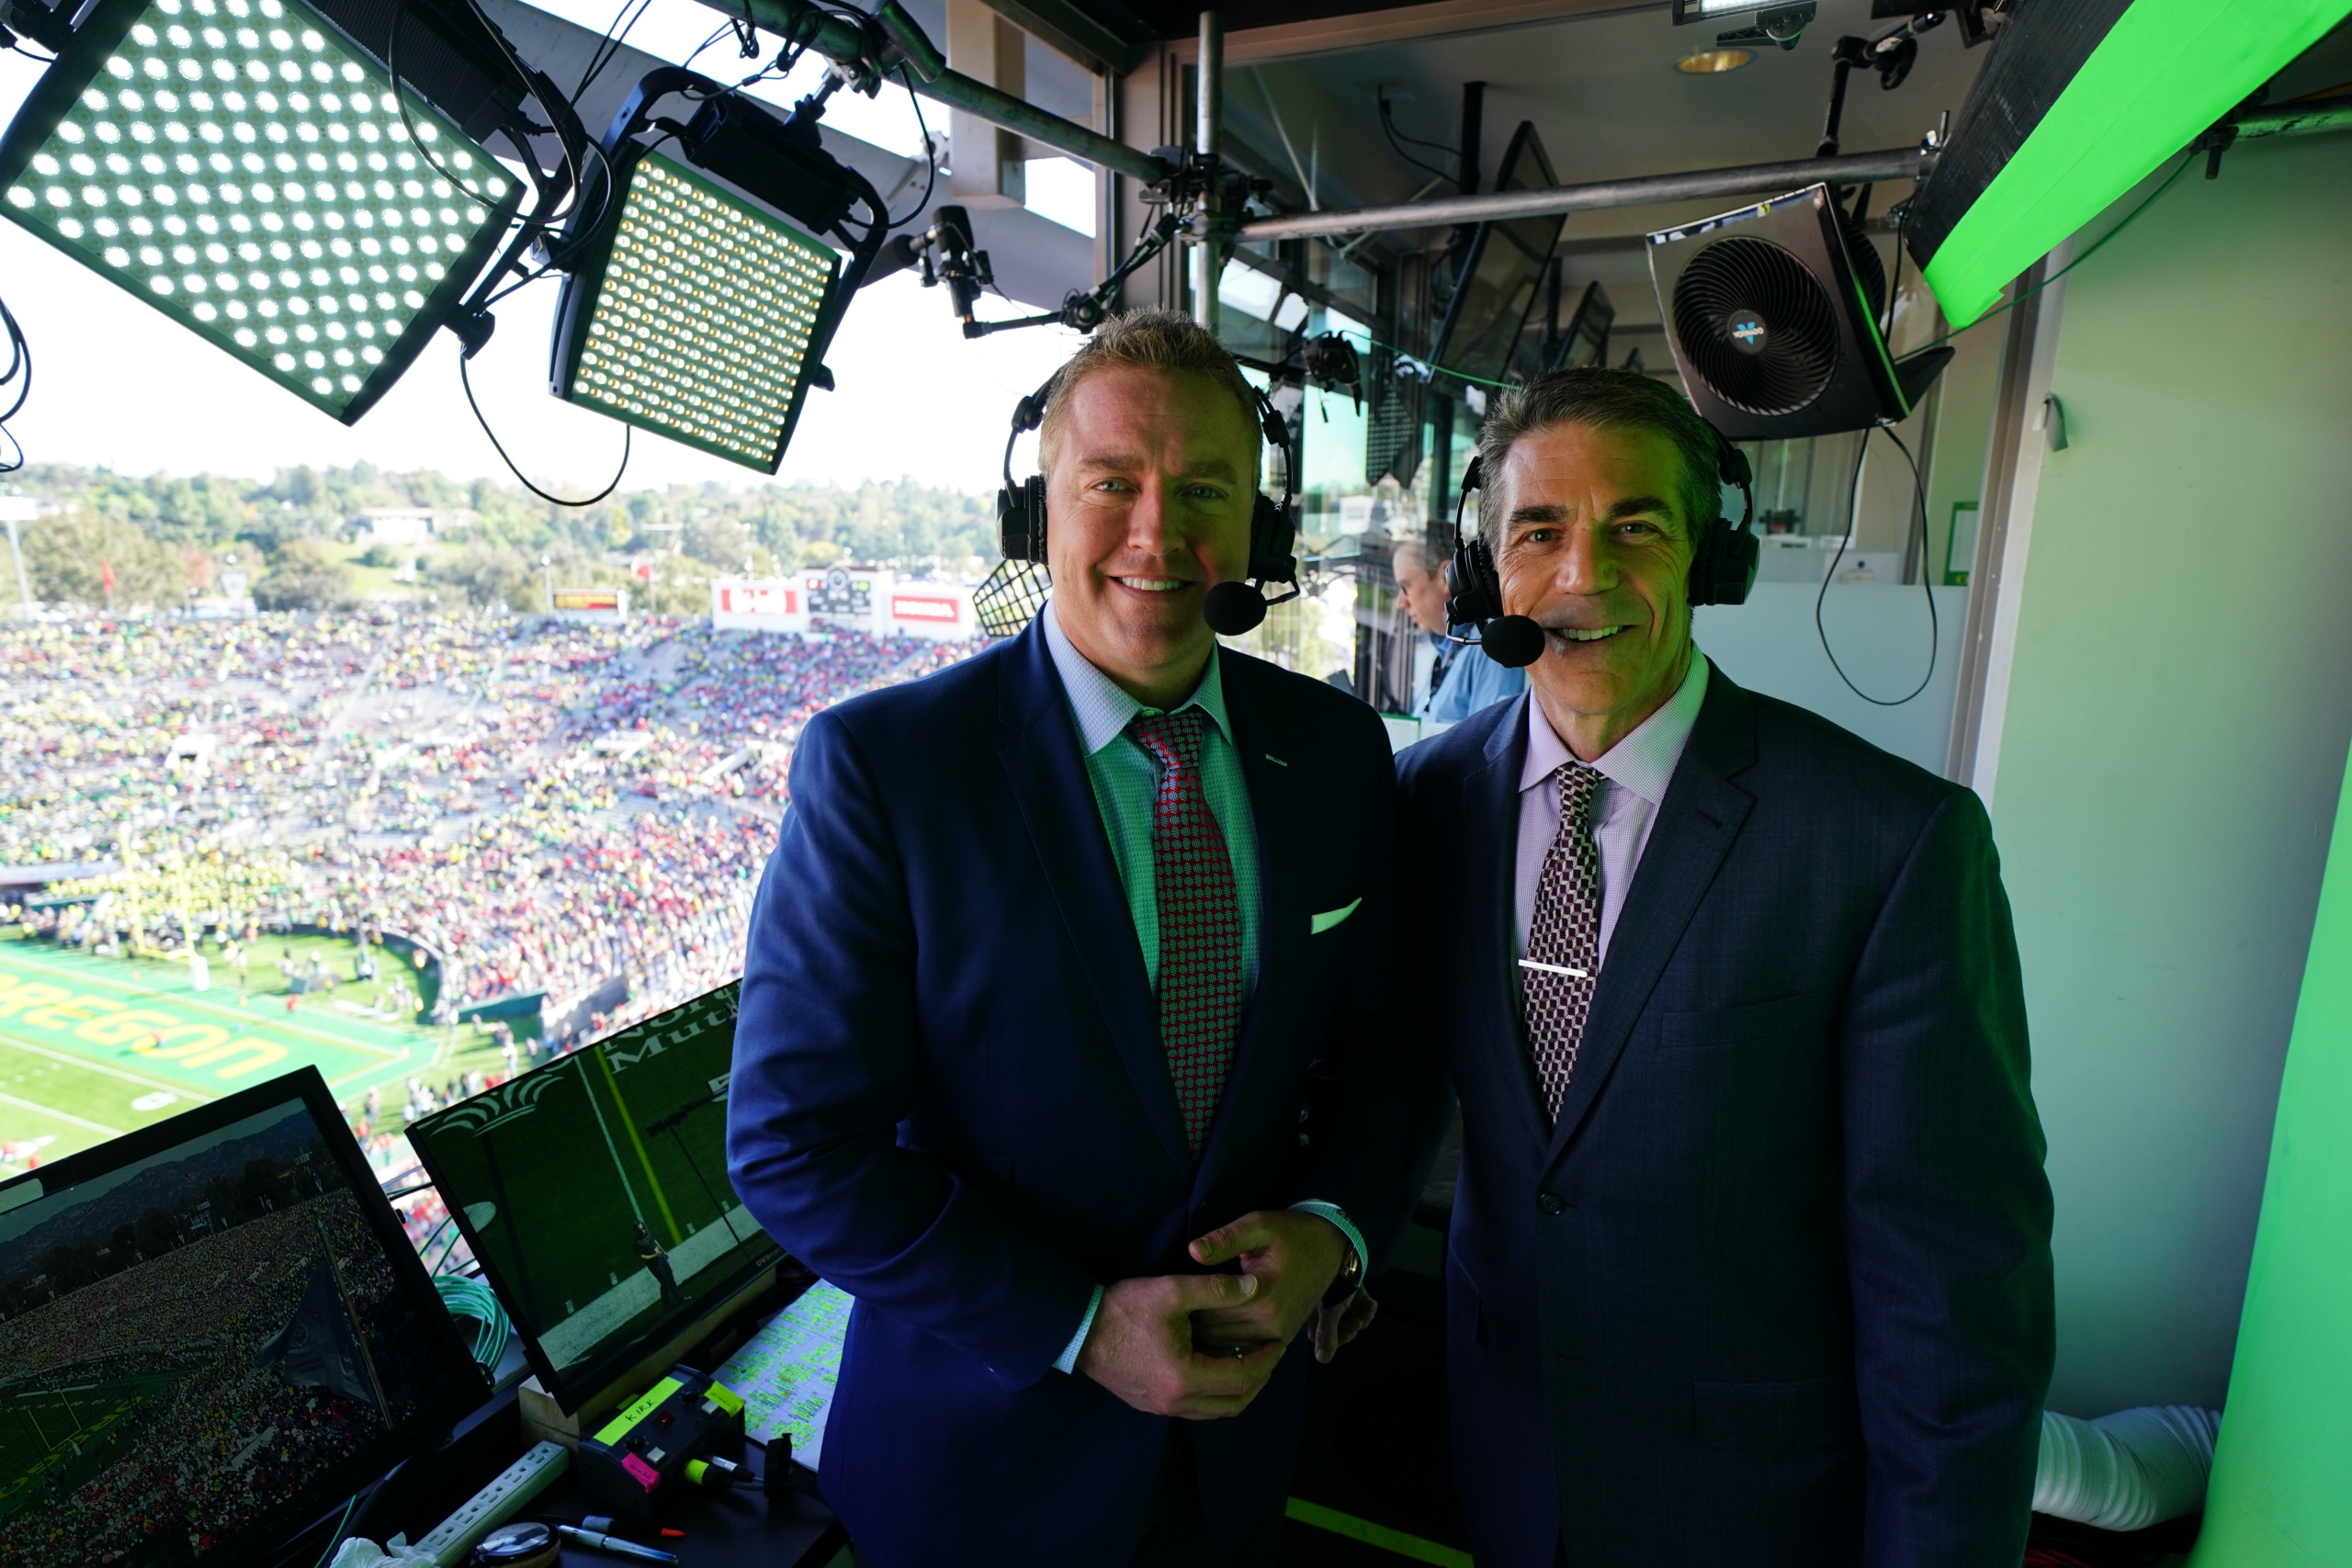 Reviewing ESPN's new 'Monday Night Football' booth; Joe Tessitore, Booger  McFarland - Sports Illustrated